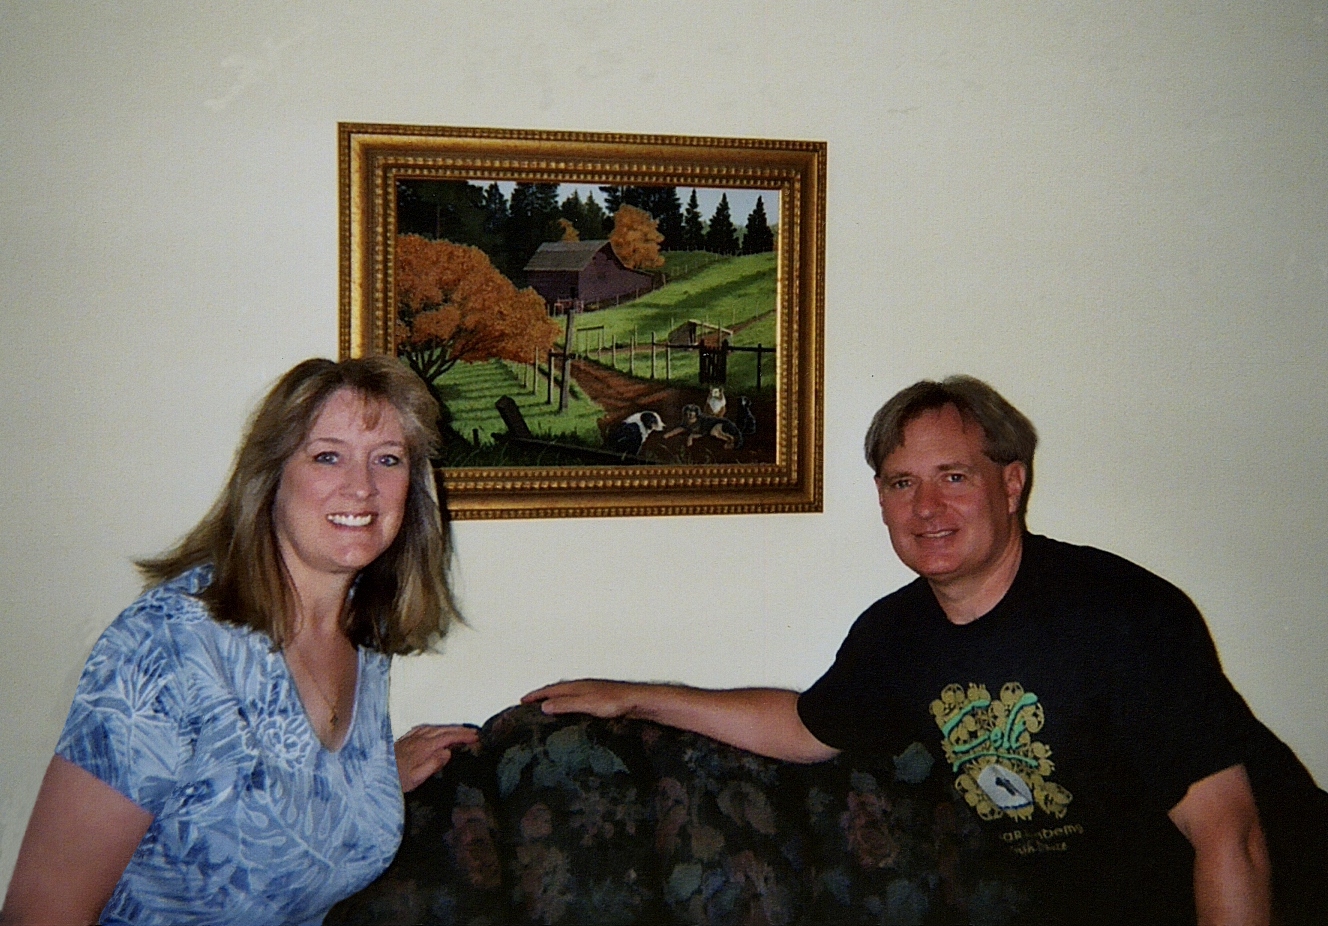 Ron Marlett and his cousin Holly in Portland, Oregon.